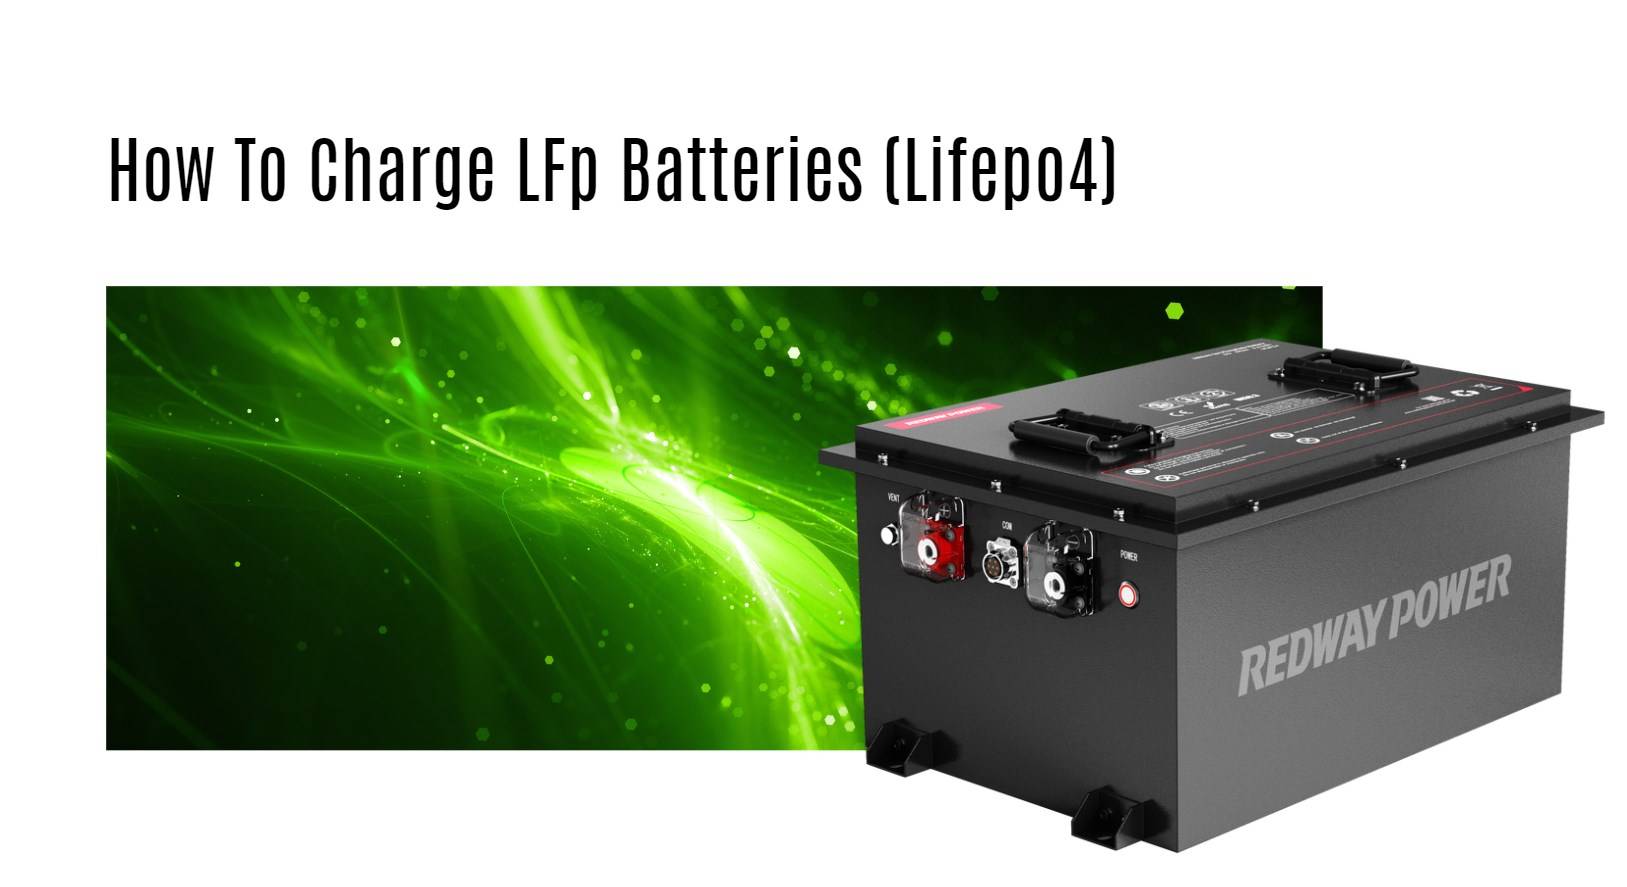 How To Charge Lithium Iron Phosphate Batteries (Lifepo4) 48v 100ah golf cart lithium battery factory manufacturer oem lifepo4 lfp